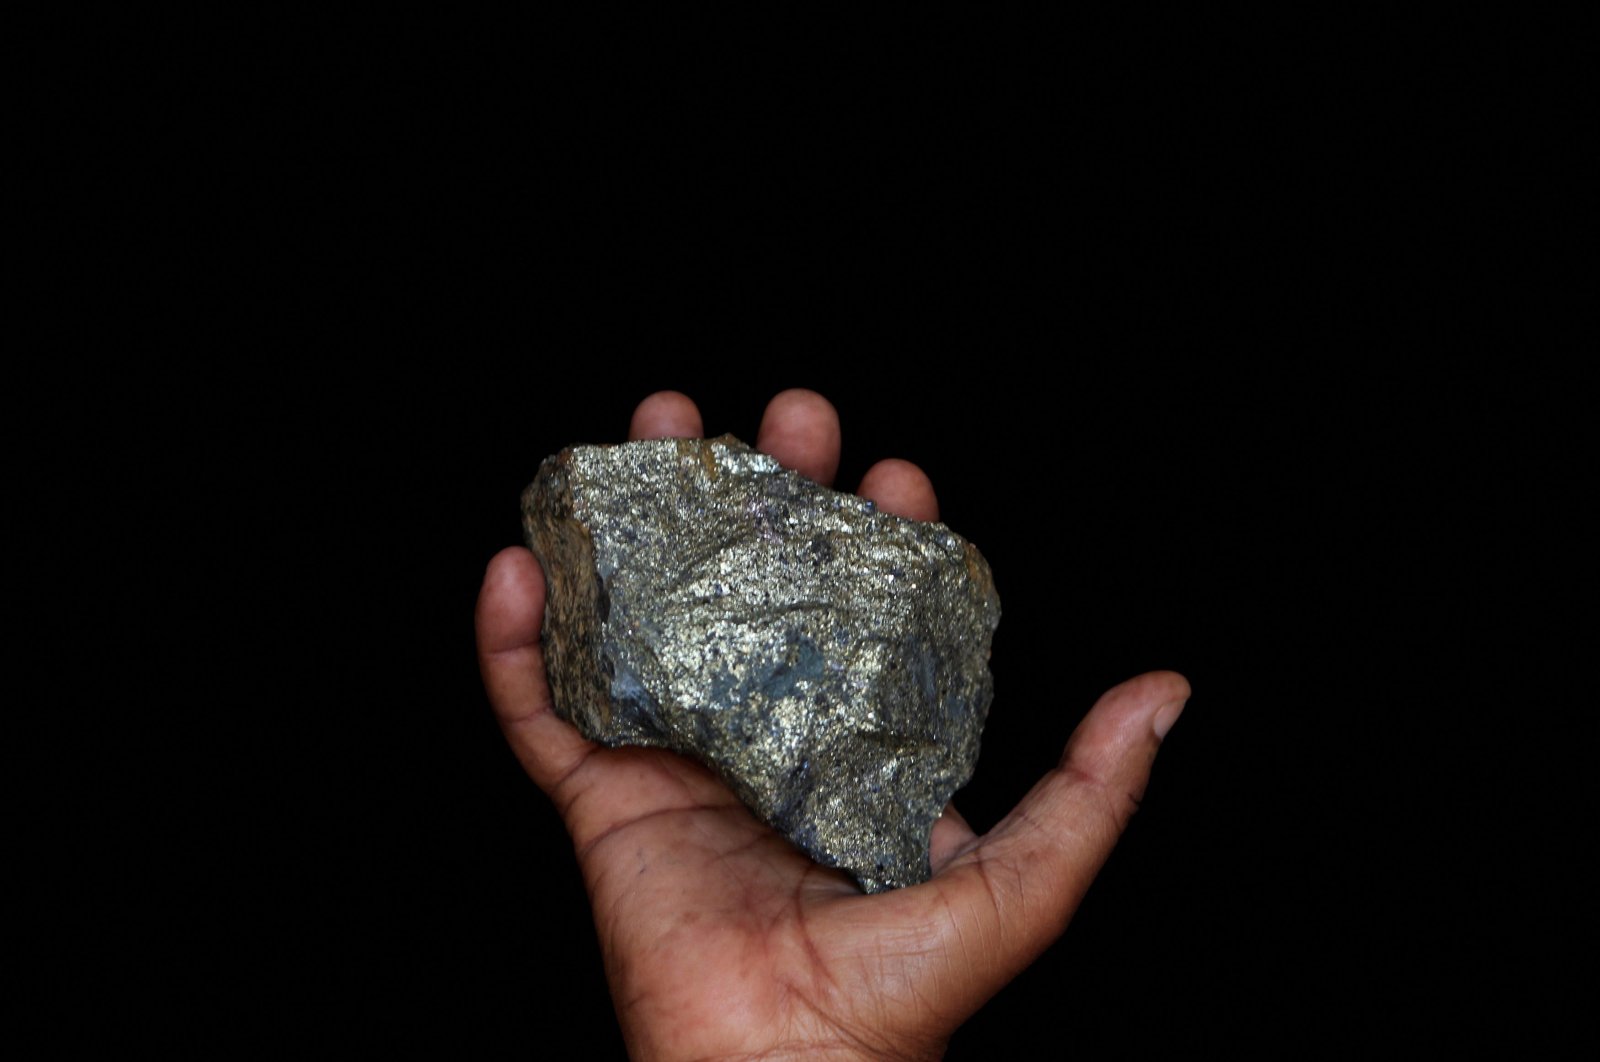 A mine employee shows a piece of copper ore at the Kilembe mines, in the foothills of the Rwenzori Mountains, Uganda, Jan. 31, 2013. (Reuters Photo)